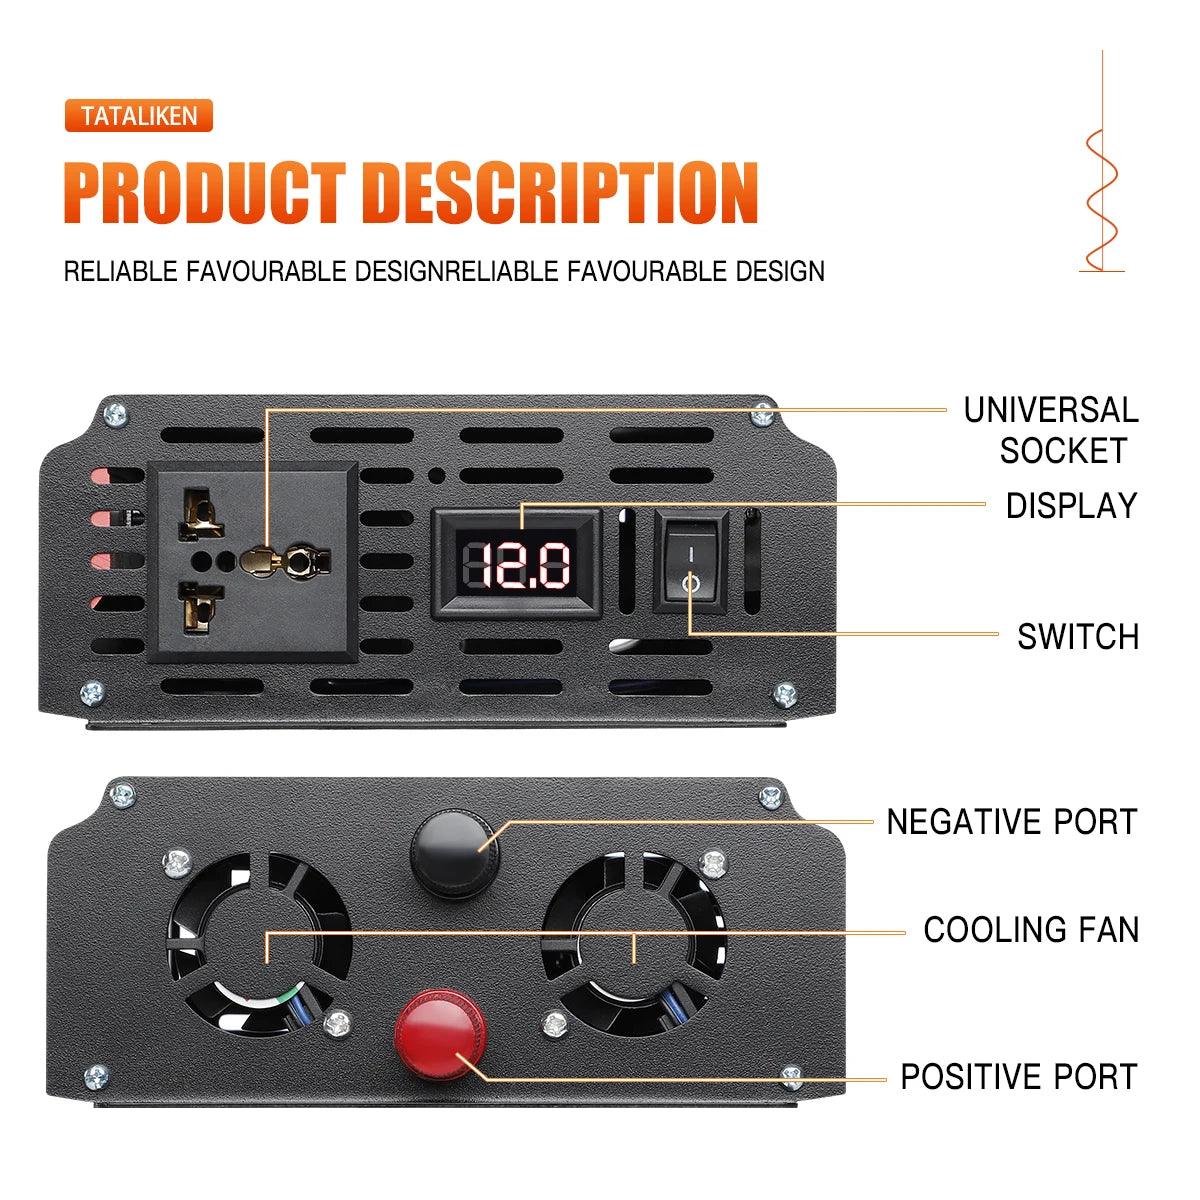 Inverter, Robust and easy-to-use power adapter with LED display and cooling fan.